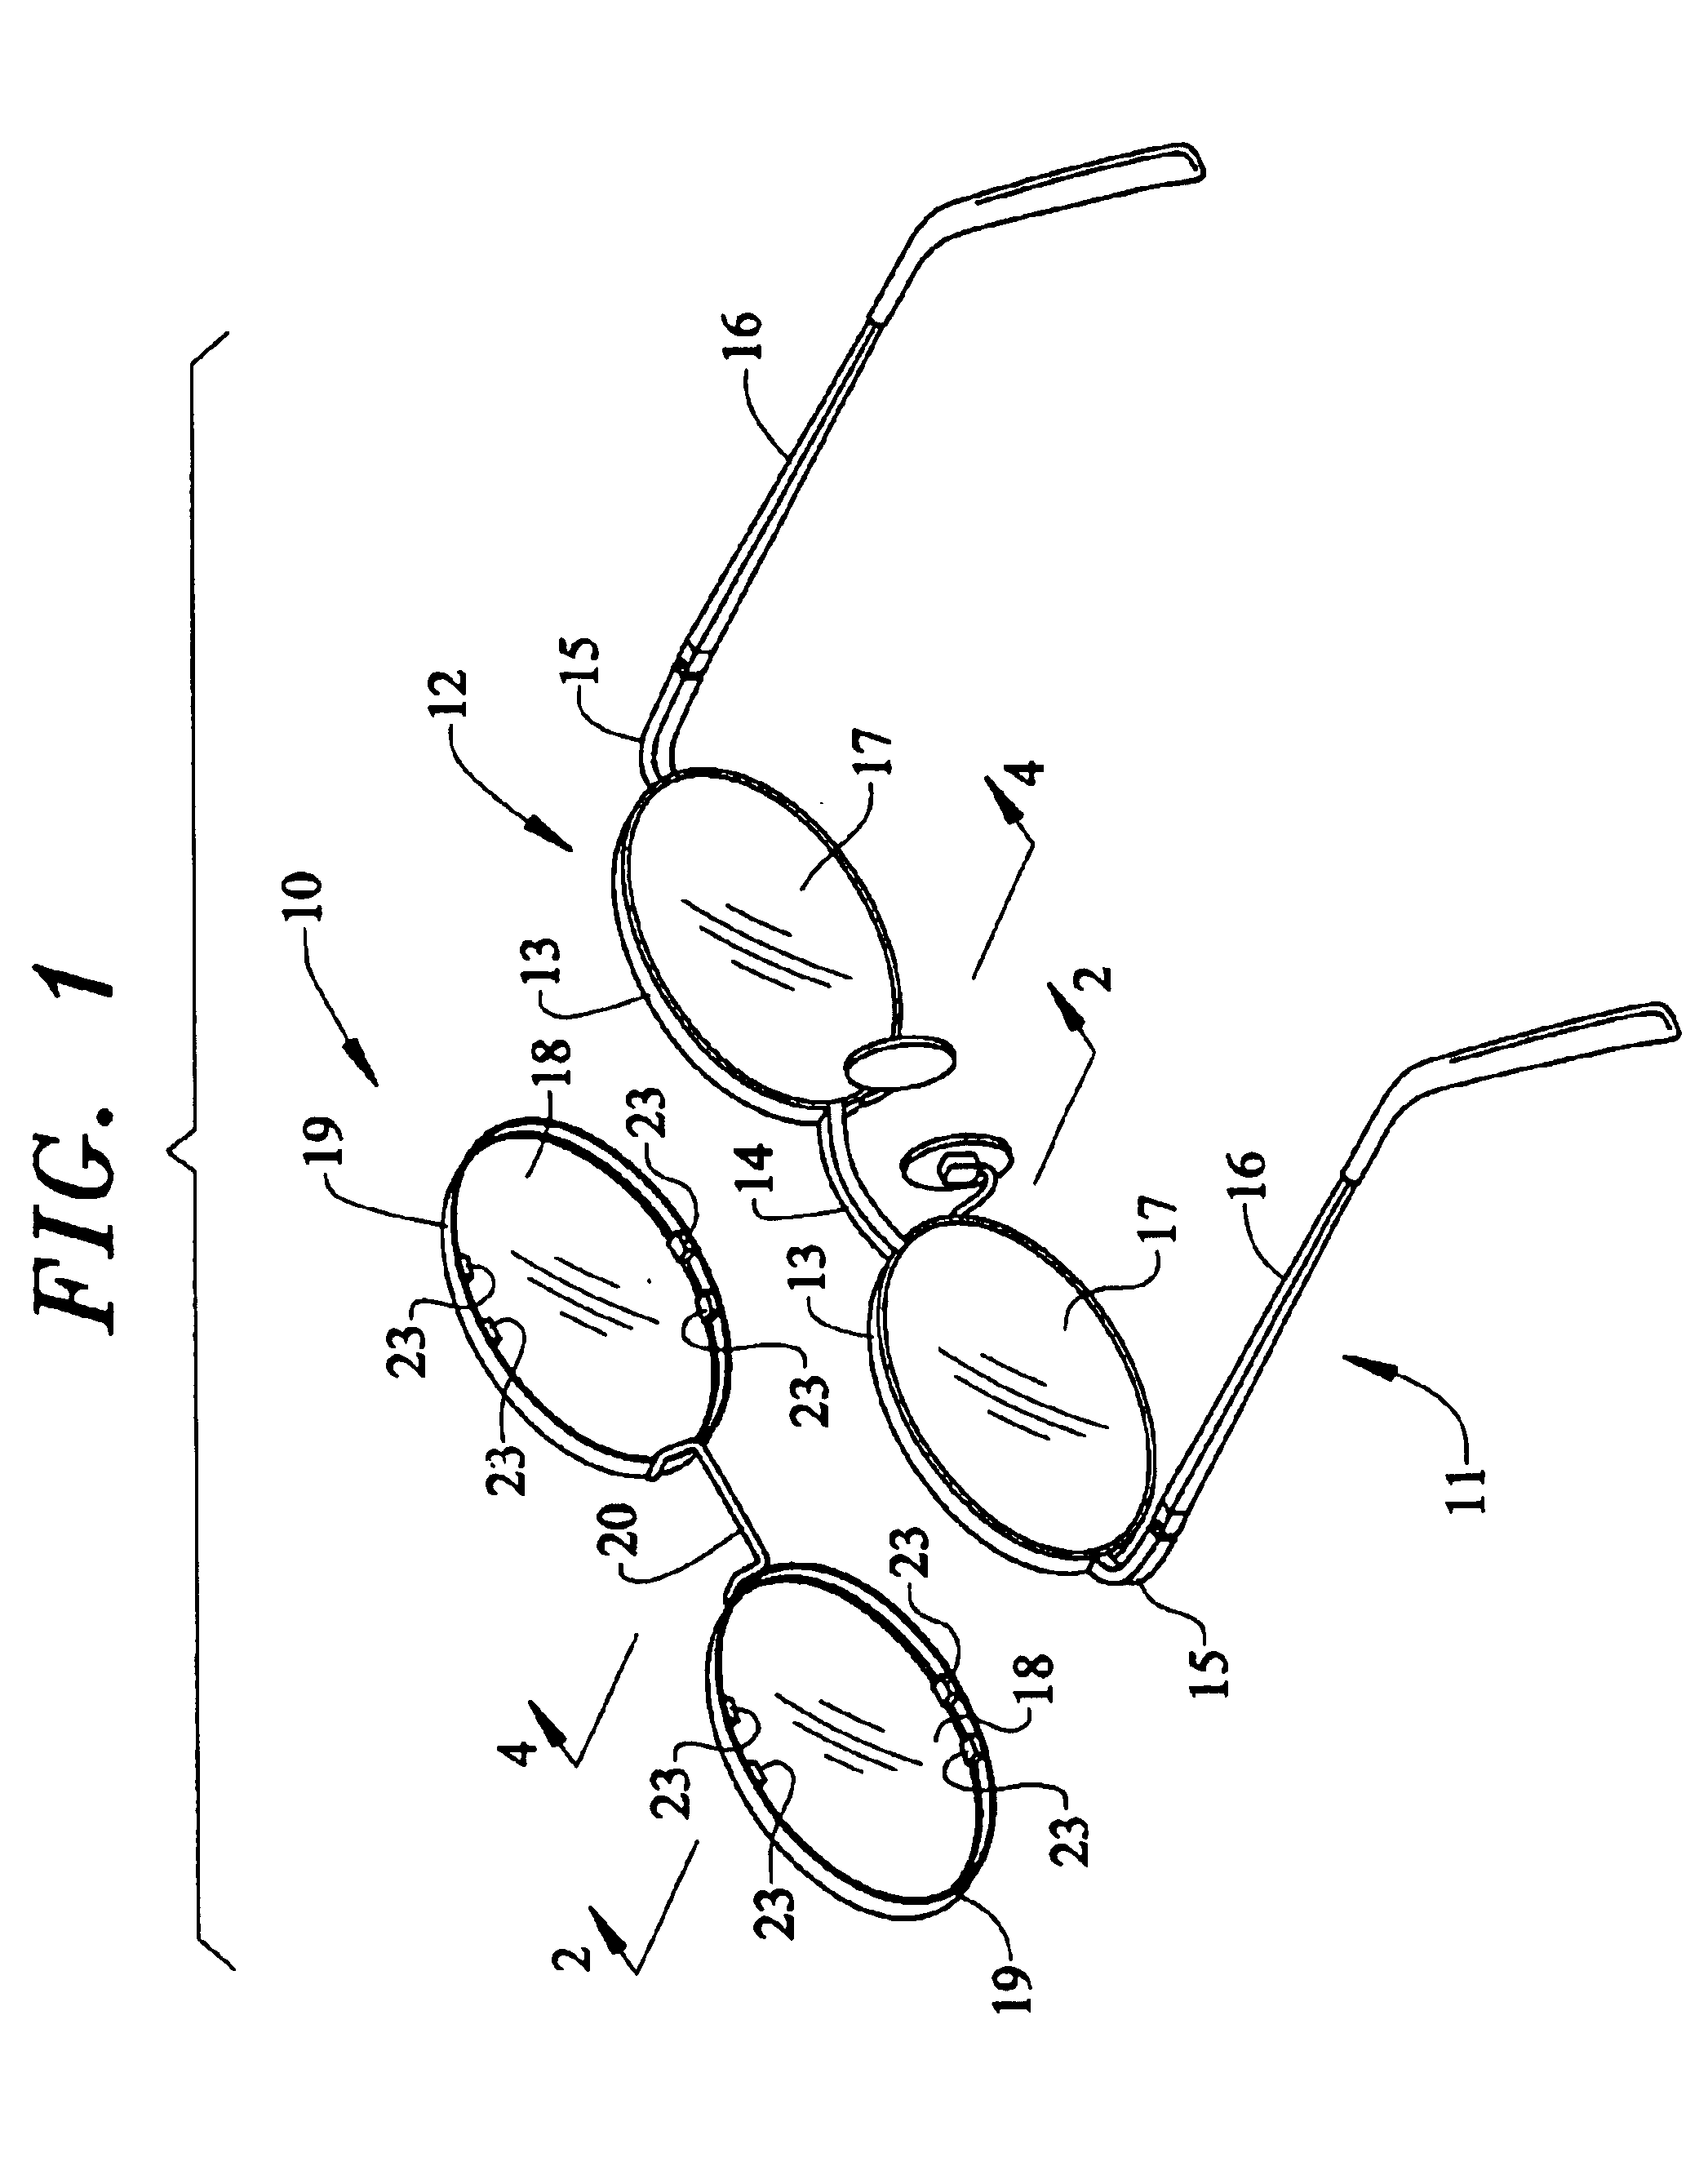 Type of magnetically attached auxiliary lens for spectacles